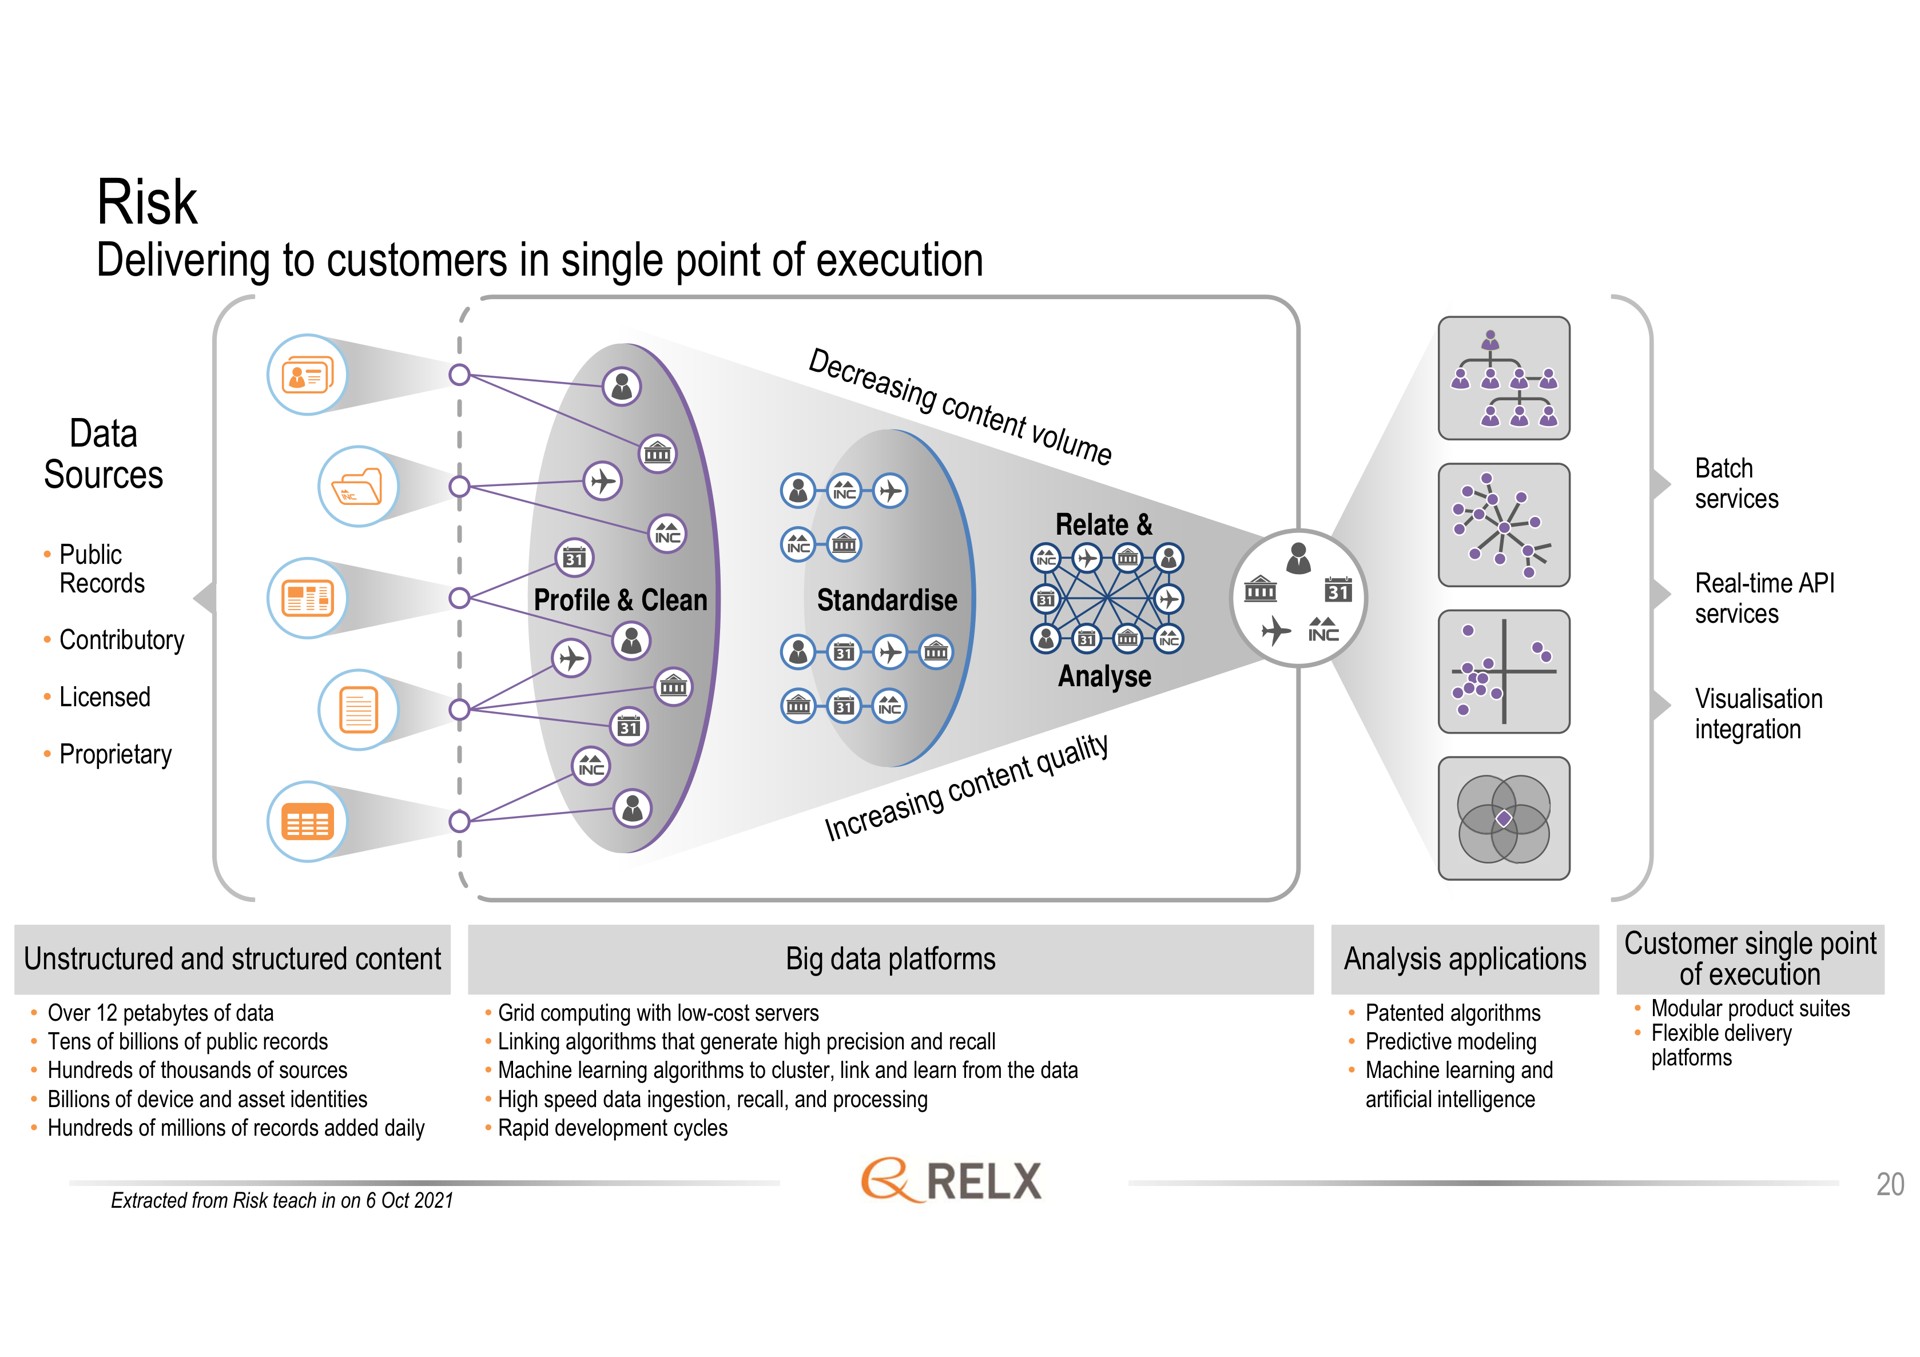 risk delivering to customers in single point of execution | RELX